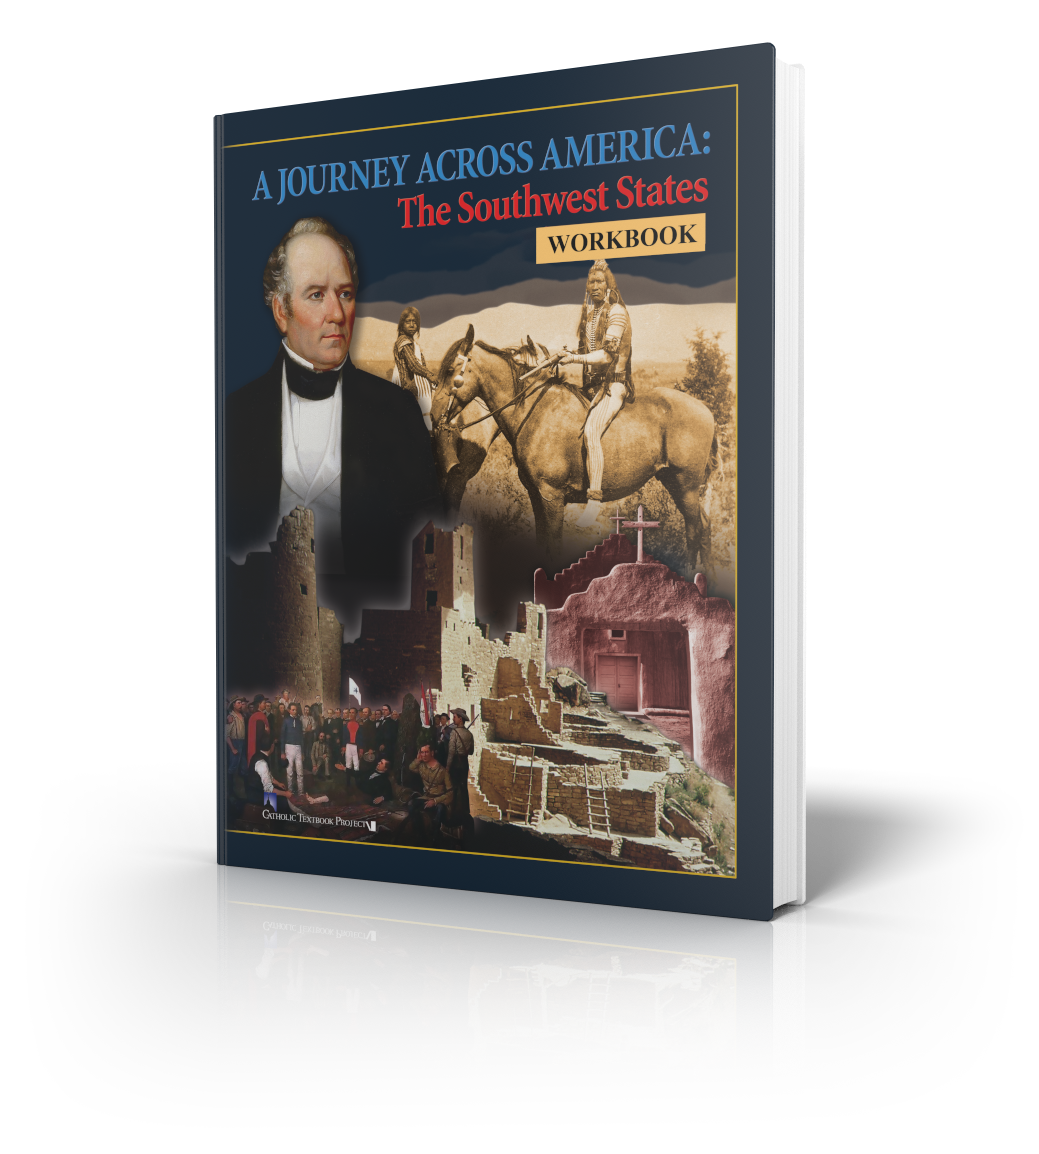 A Journey Across America: The Southwest States (Workbook)